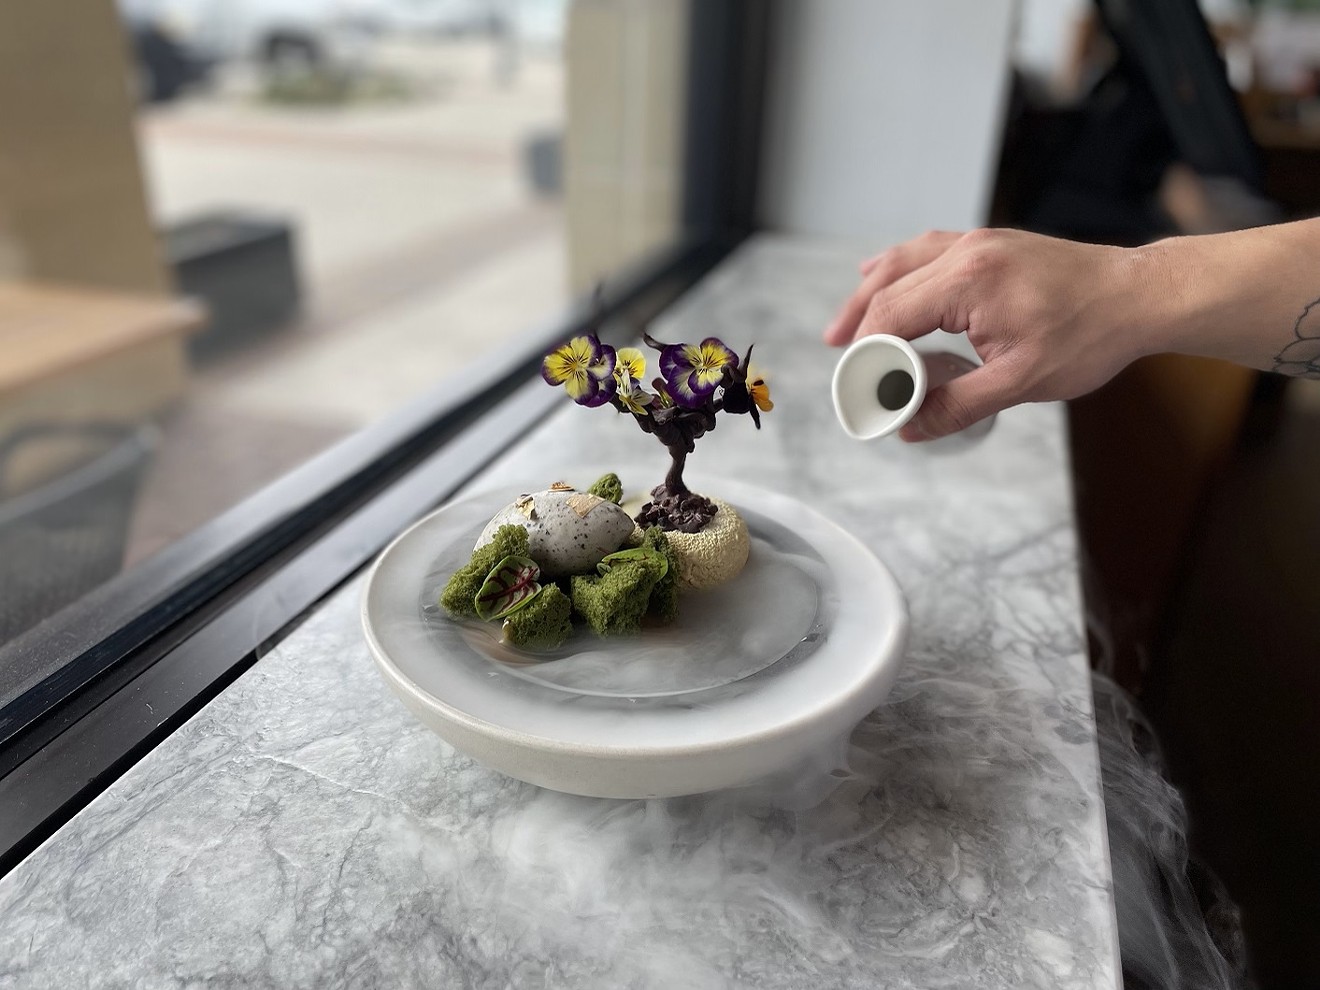 Tobiuo Sushi & Bar will show off its second-place Truffle Masters dish for a limited time.